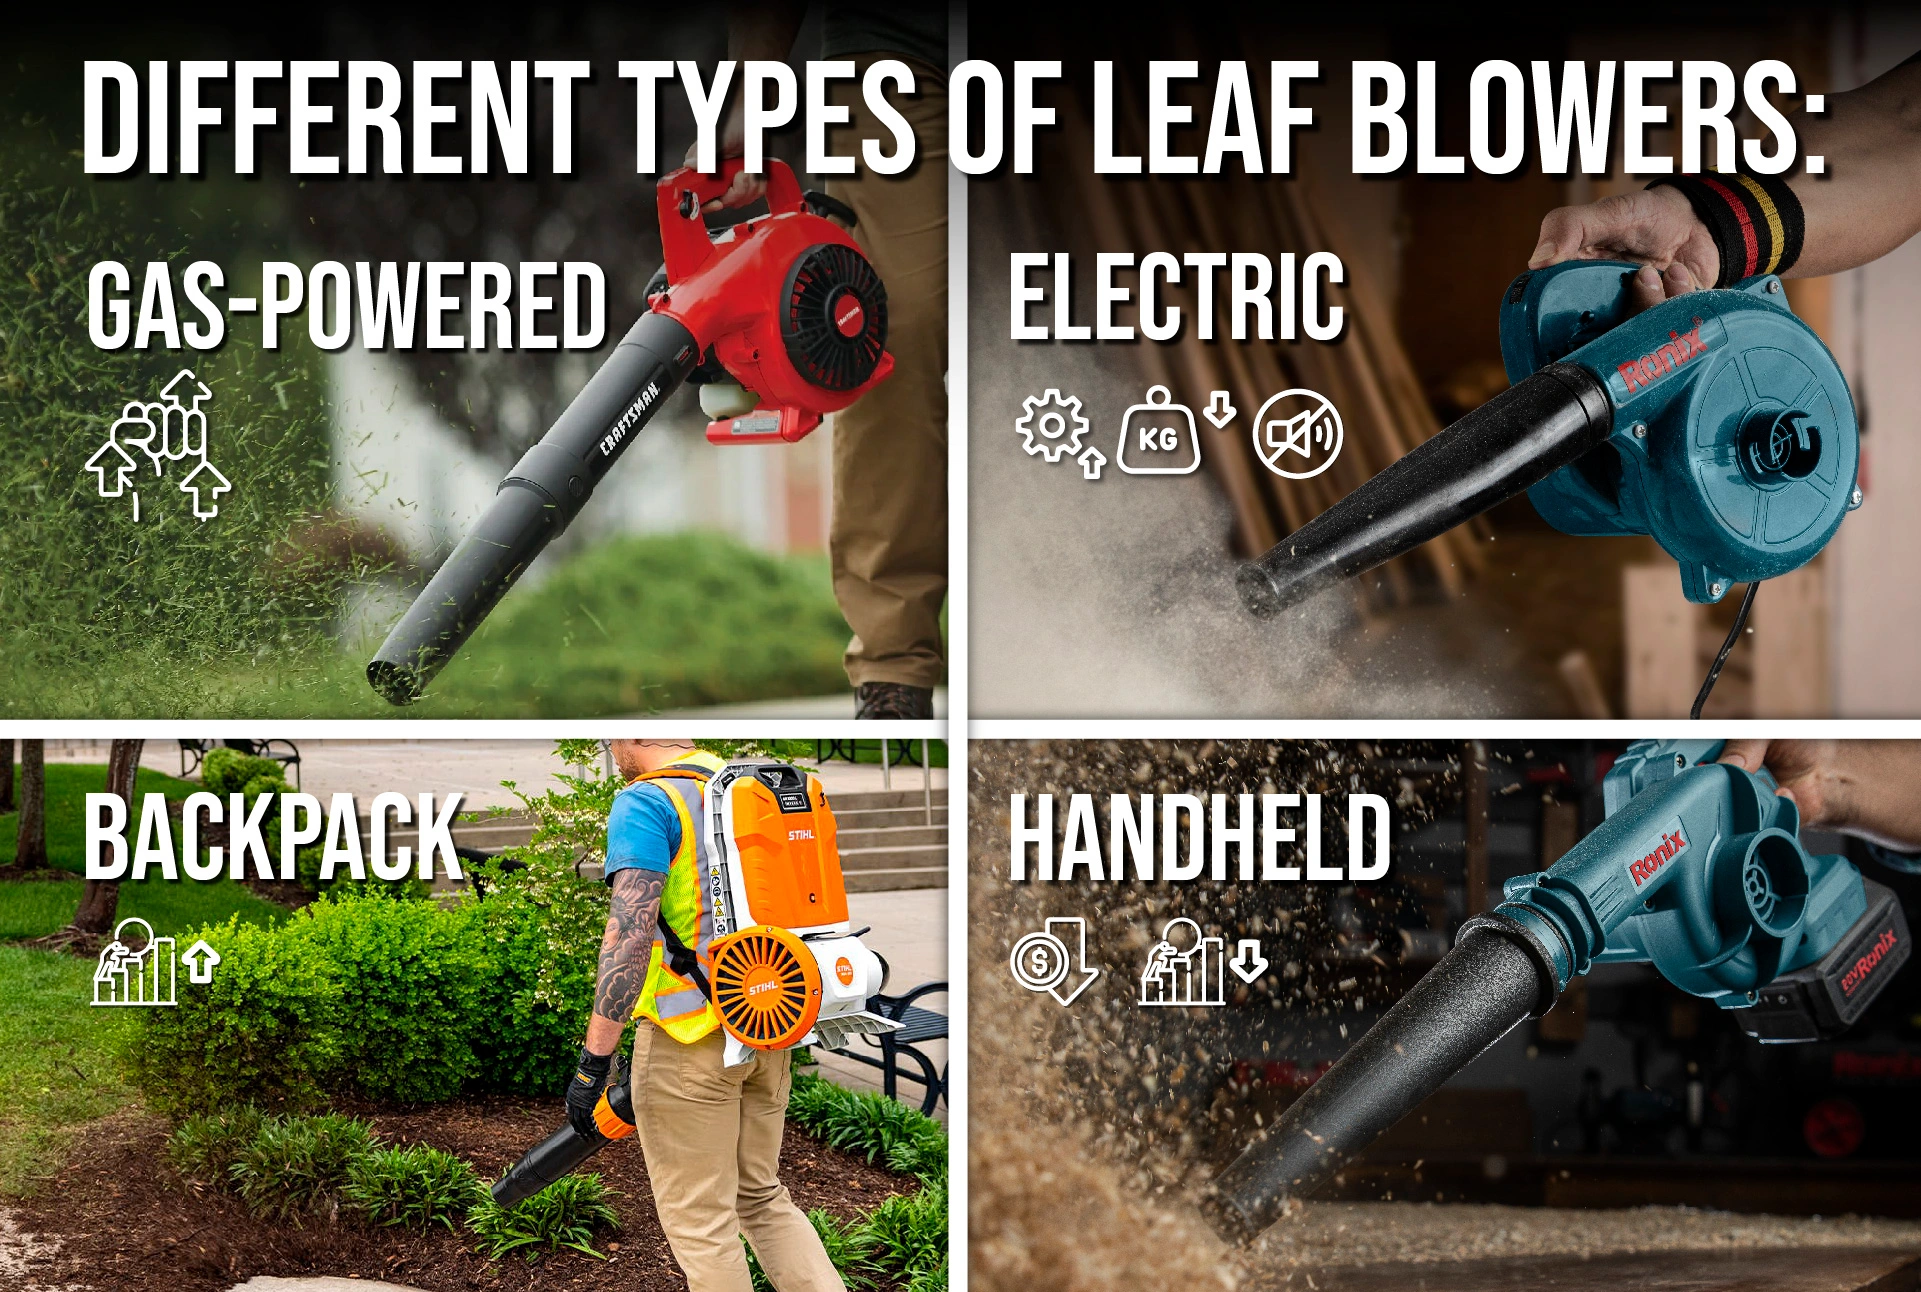 An infographic on different types of leaf blowers